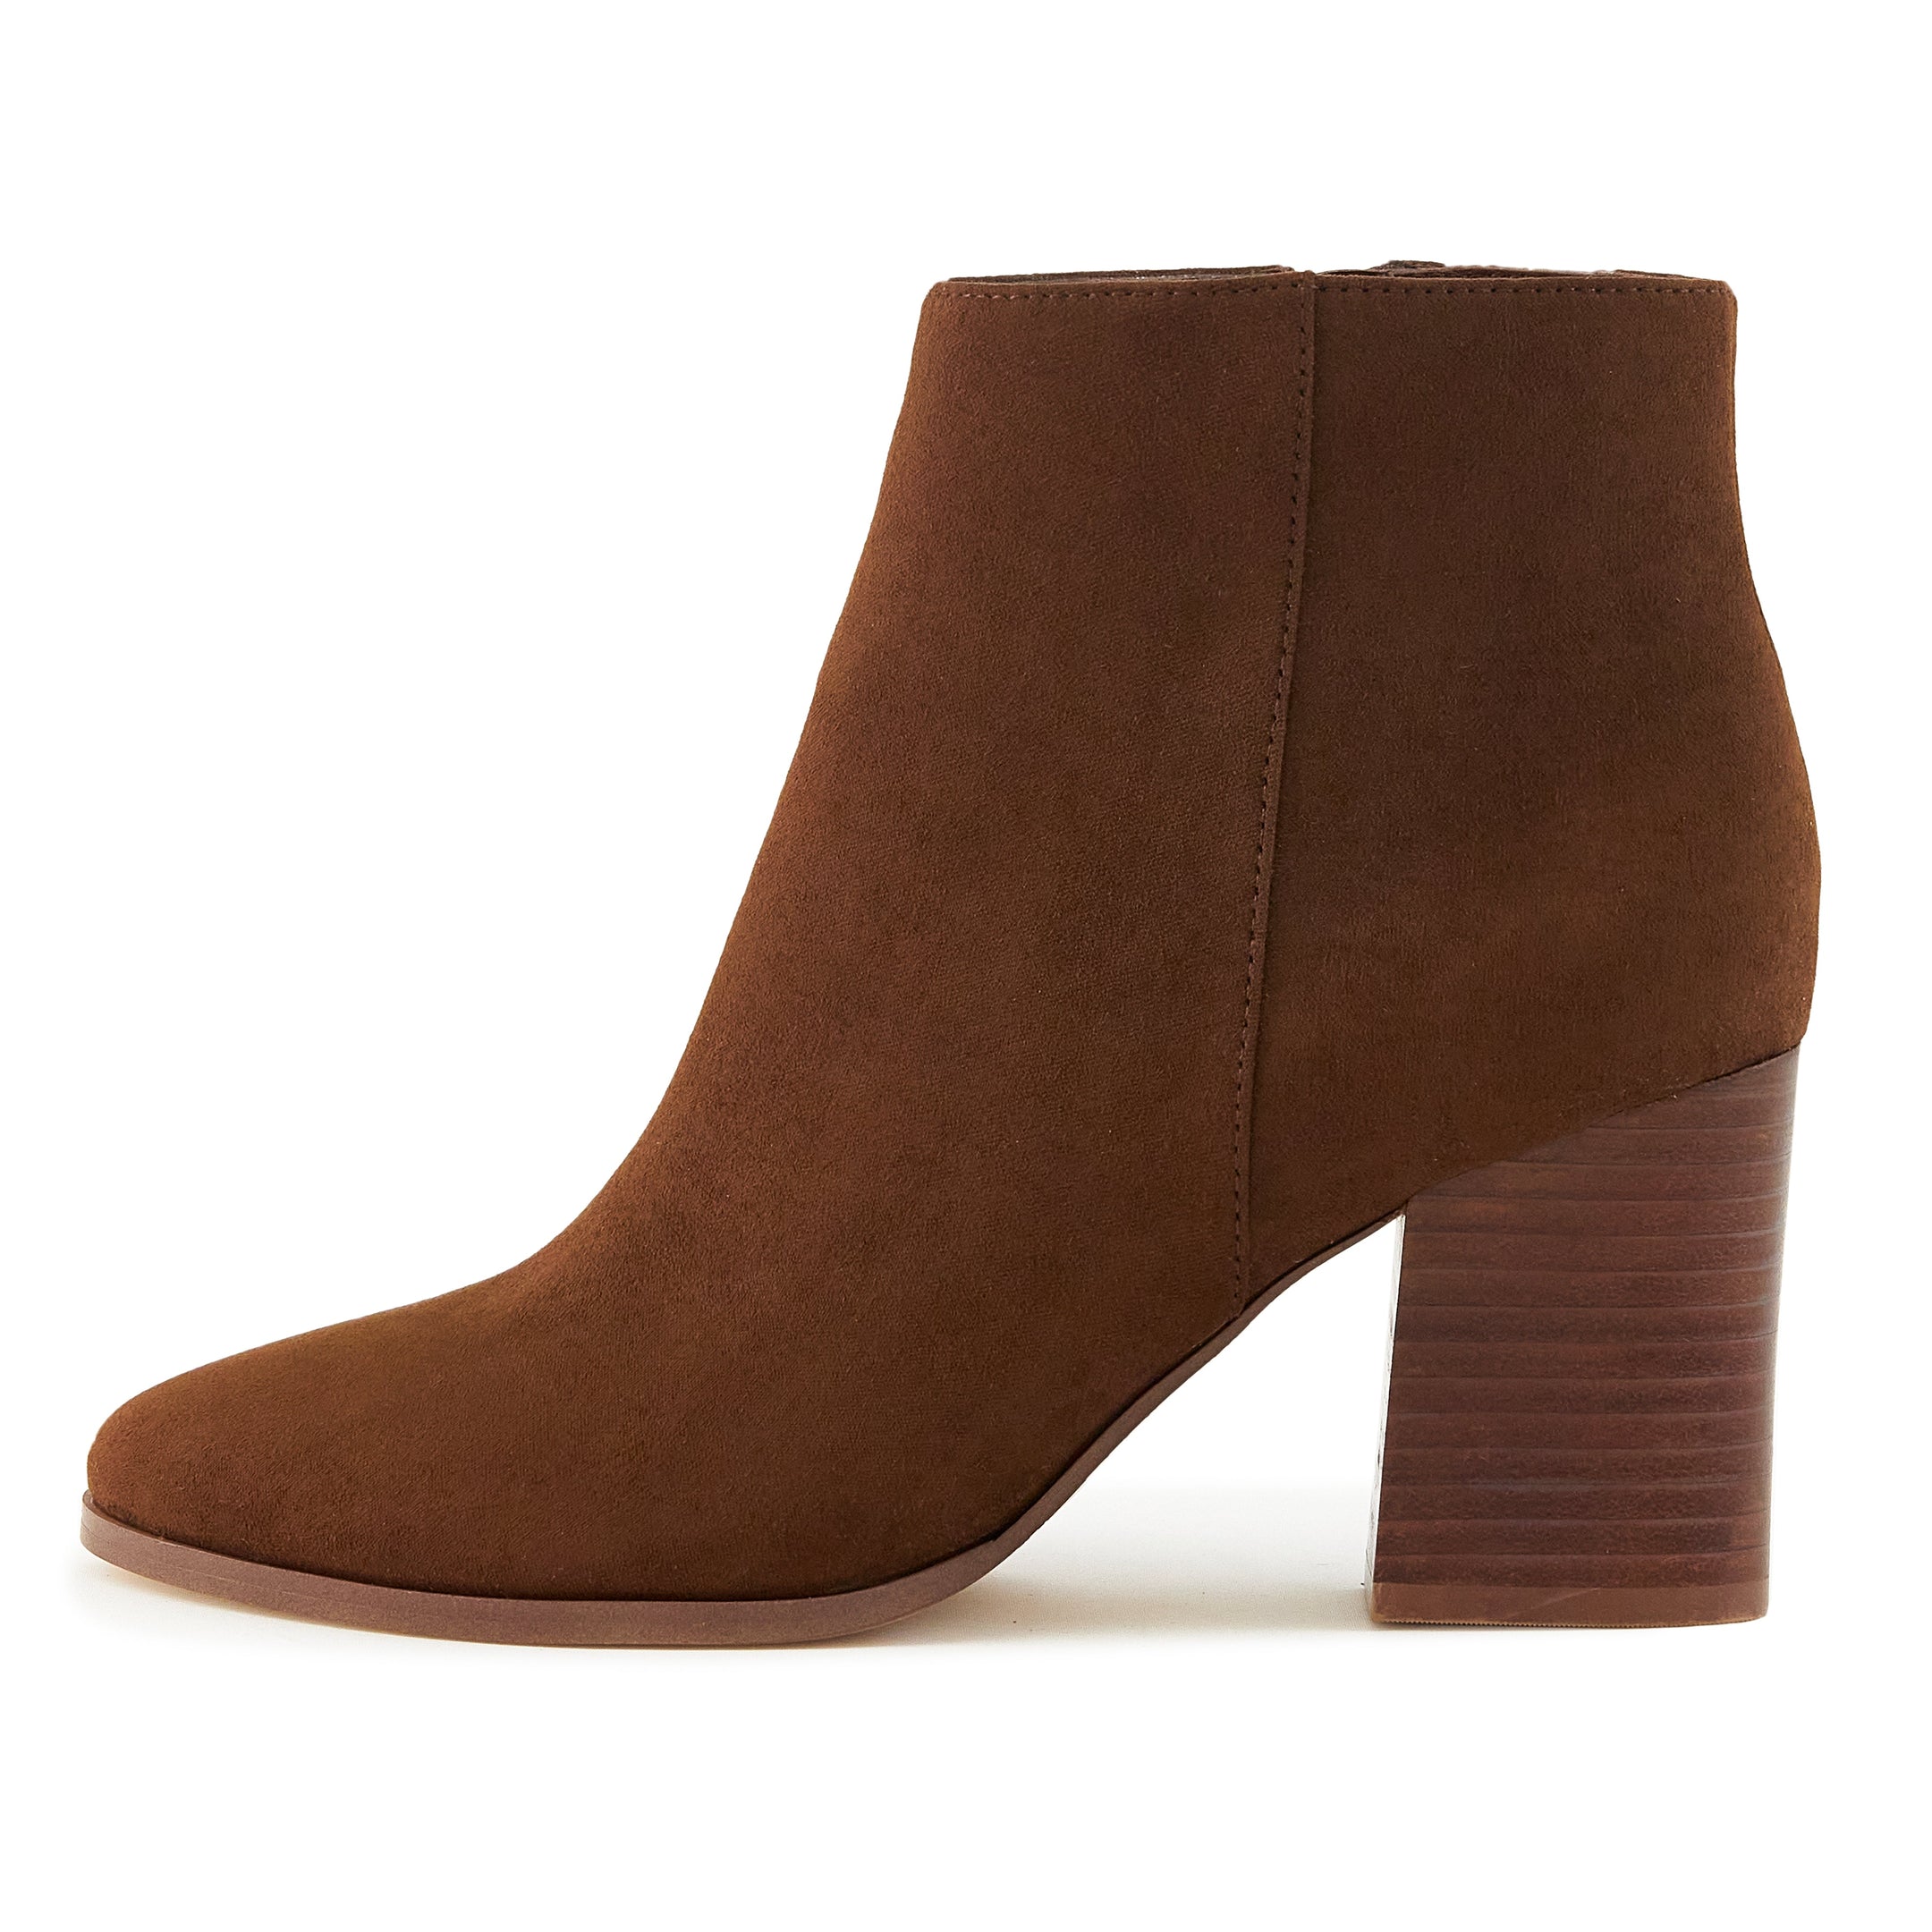 Buy Women's Malibu Boots Brown by Nest Shoes